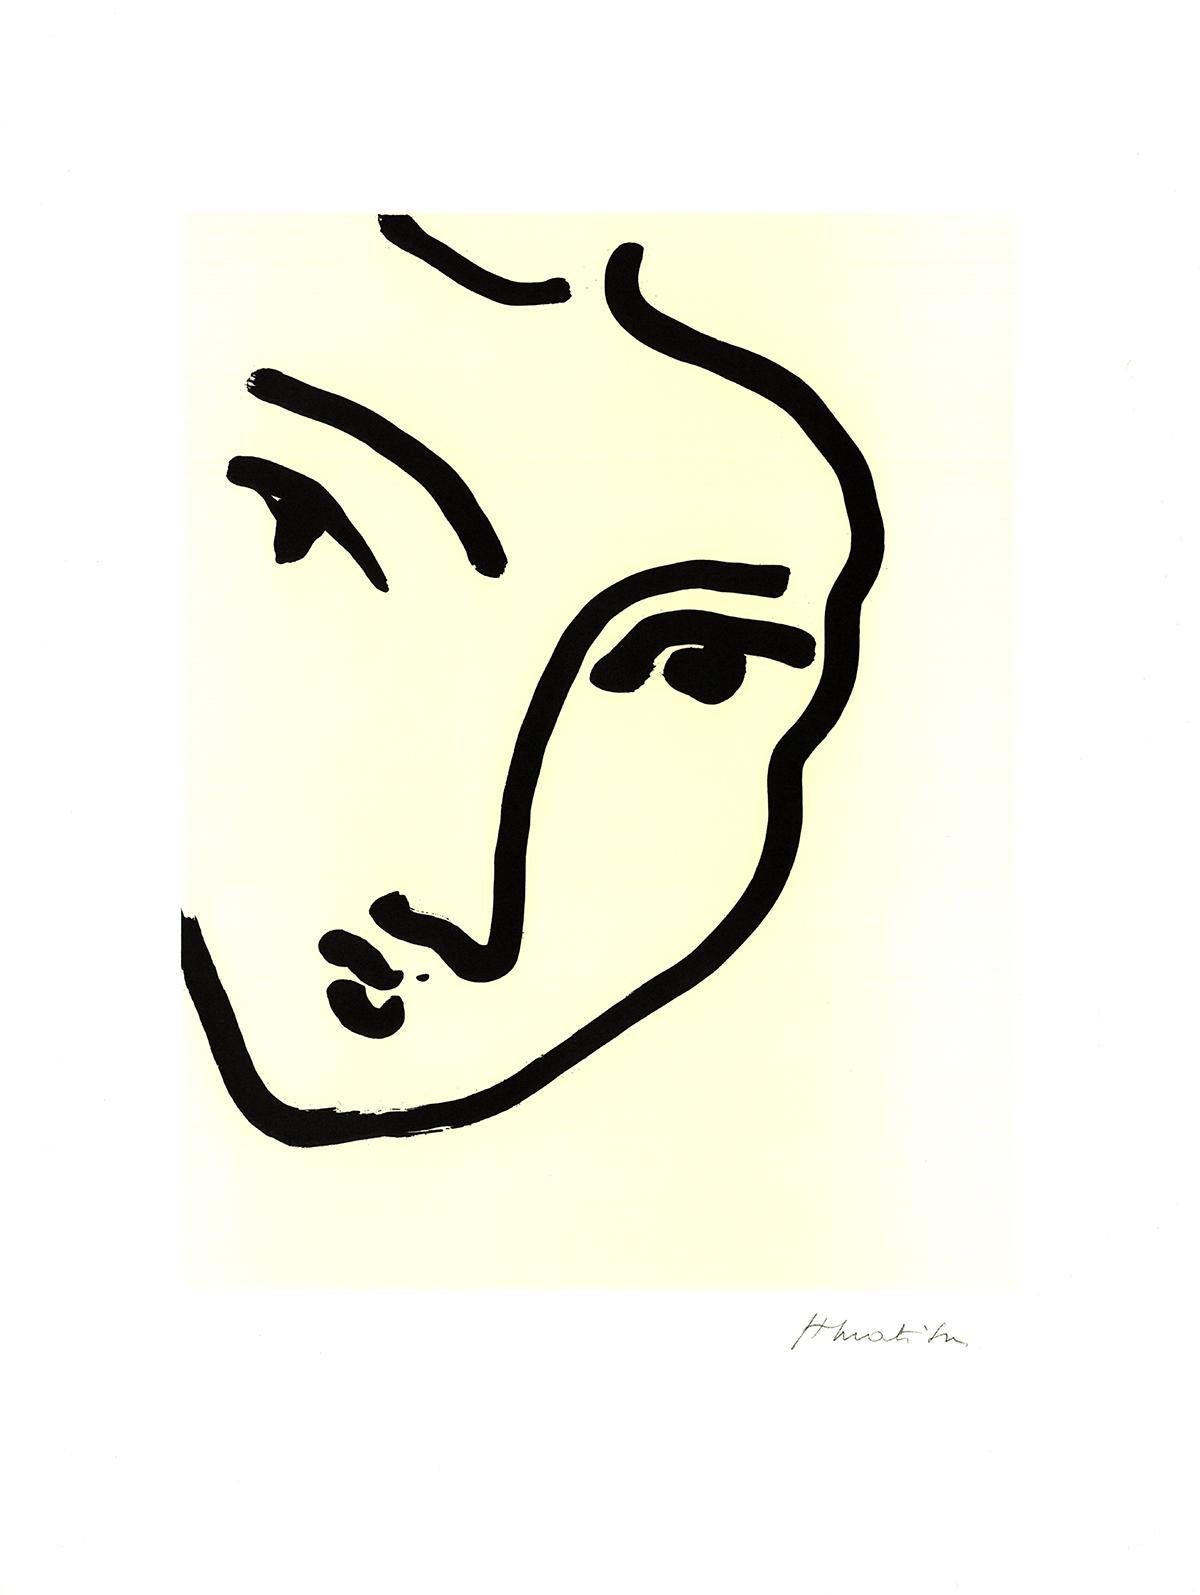 Sku: R176
Artist: Henri Matisse
Title: Nadia Au Menton Pointu
Year: 1995
Signed: No
Medium: Offset Lithograph
Paper Size: 23.5 x 17.5 inches ( 59.69 x 44.45 cm )
Image Size: 16 x 12.25 inches ( 40.64 x 31.115 cm )
Edition Size: 2500
Framed: